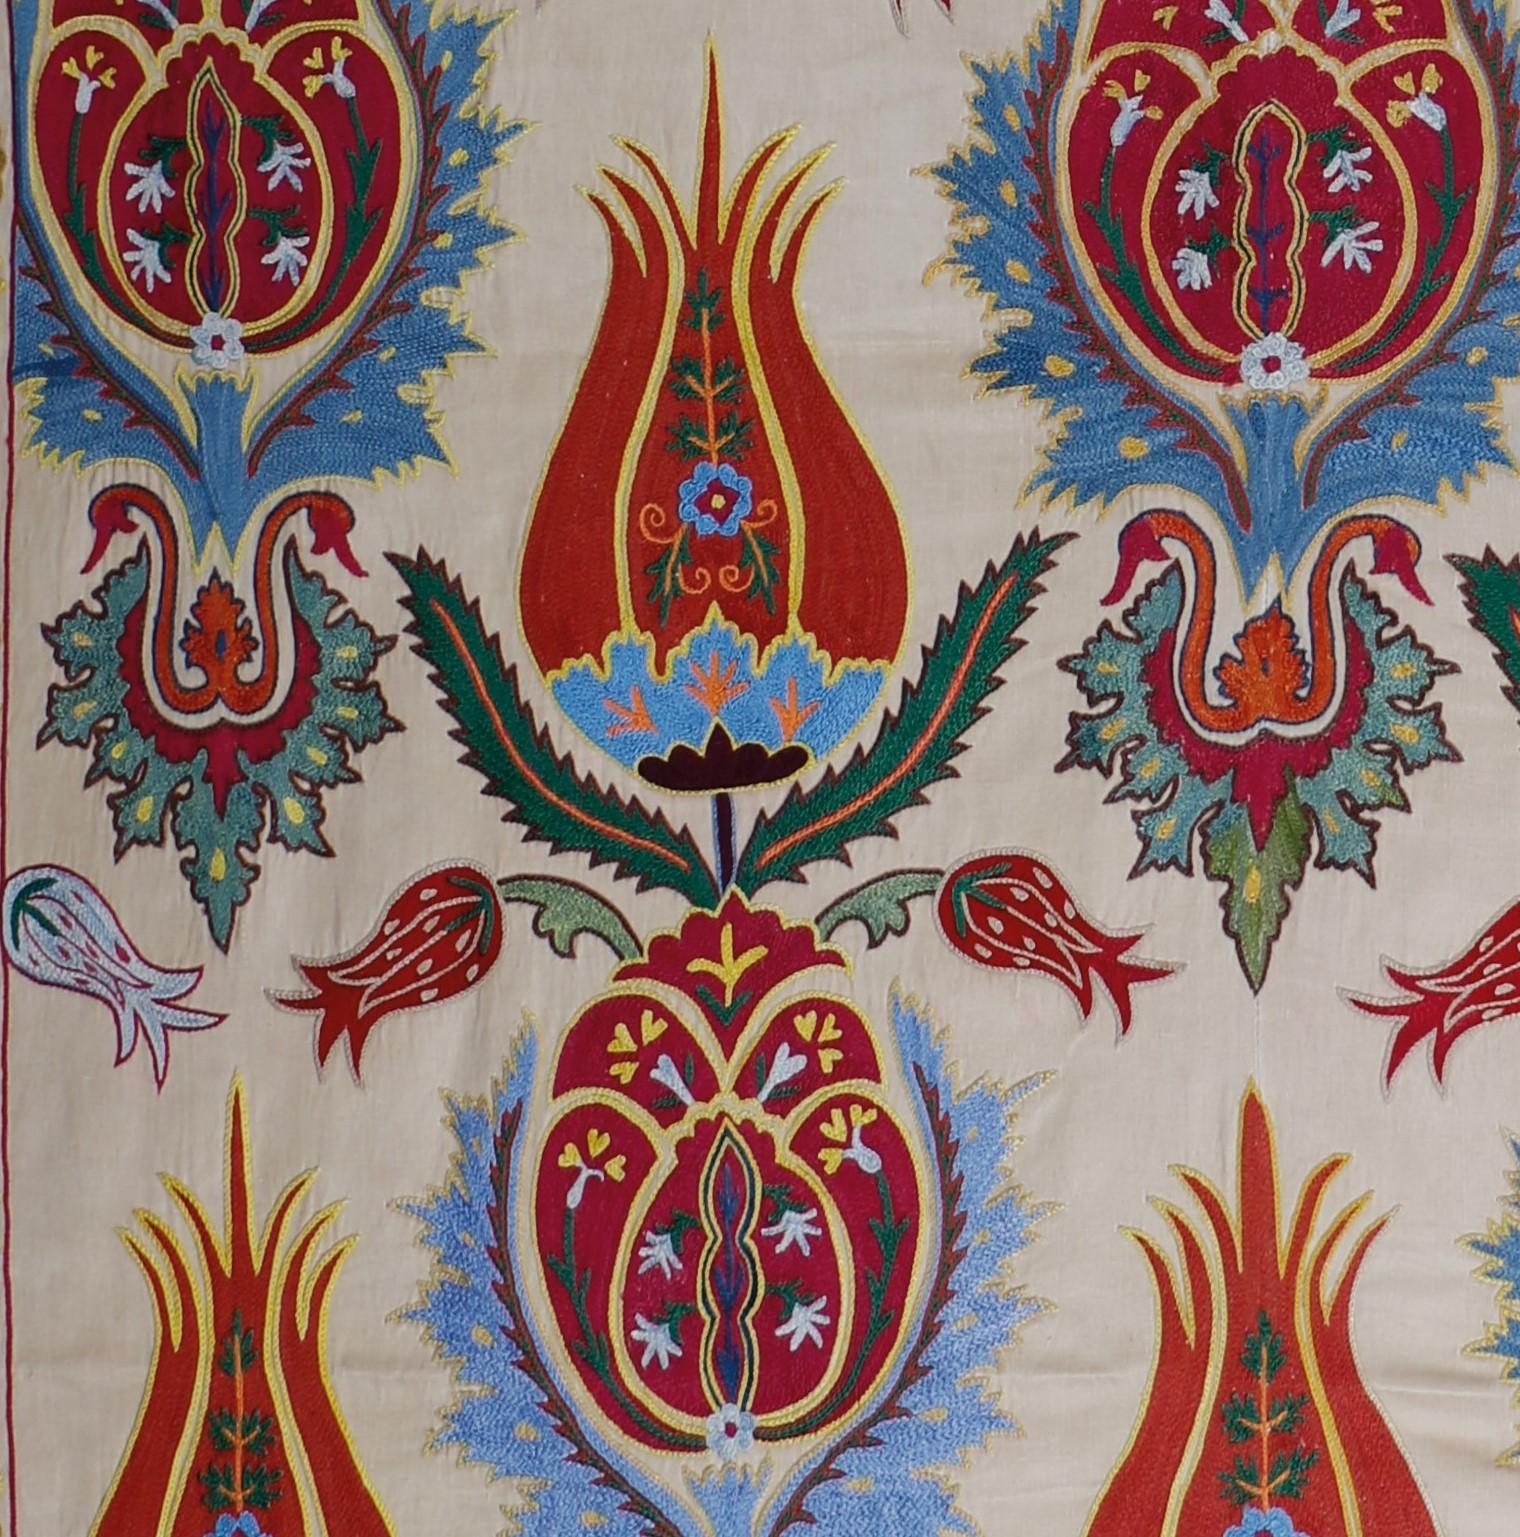 Suzani tapestries are a type of embroidered textile that originated in Central Asia, and were popular throughout the Ottoman Empire. These decorative textiles were hand-crafted by skilled artisans and were often used to decorate the homes of wealthy